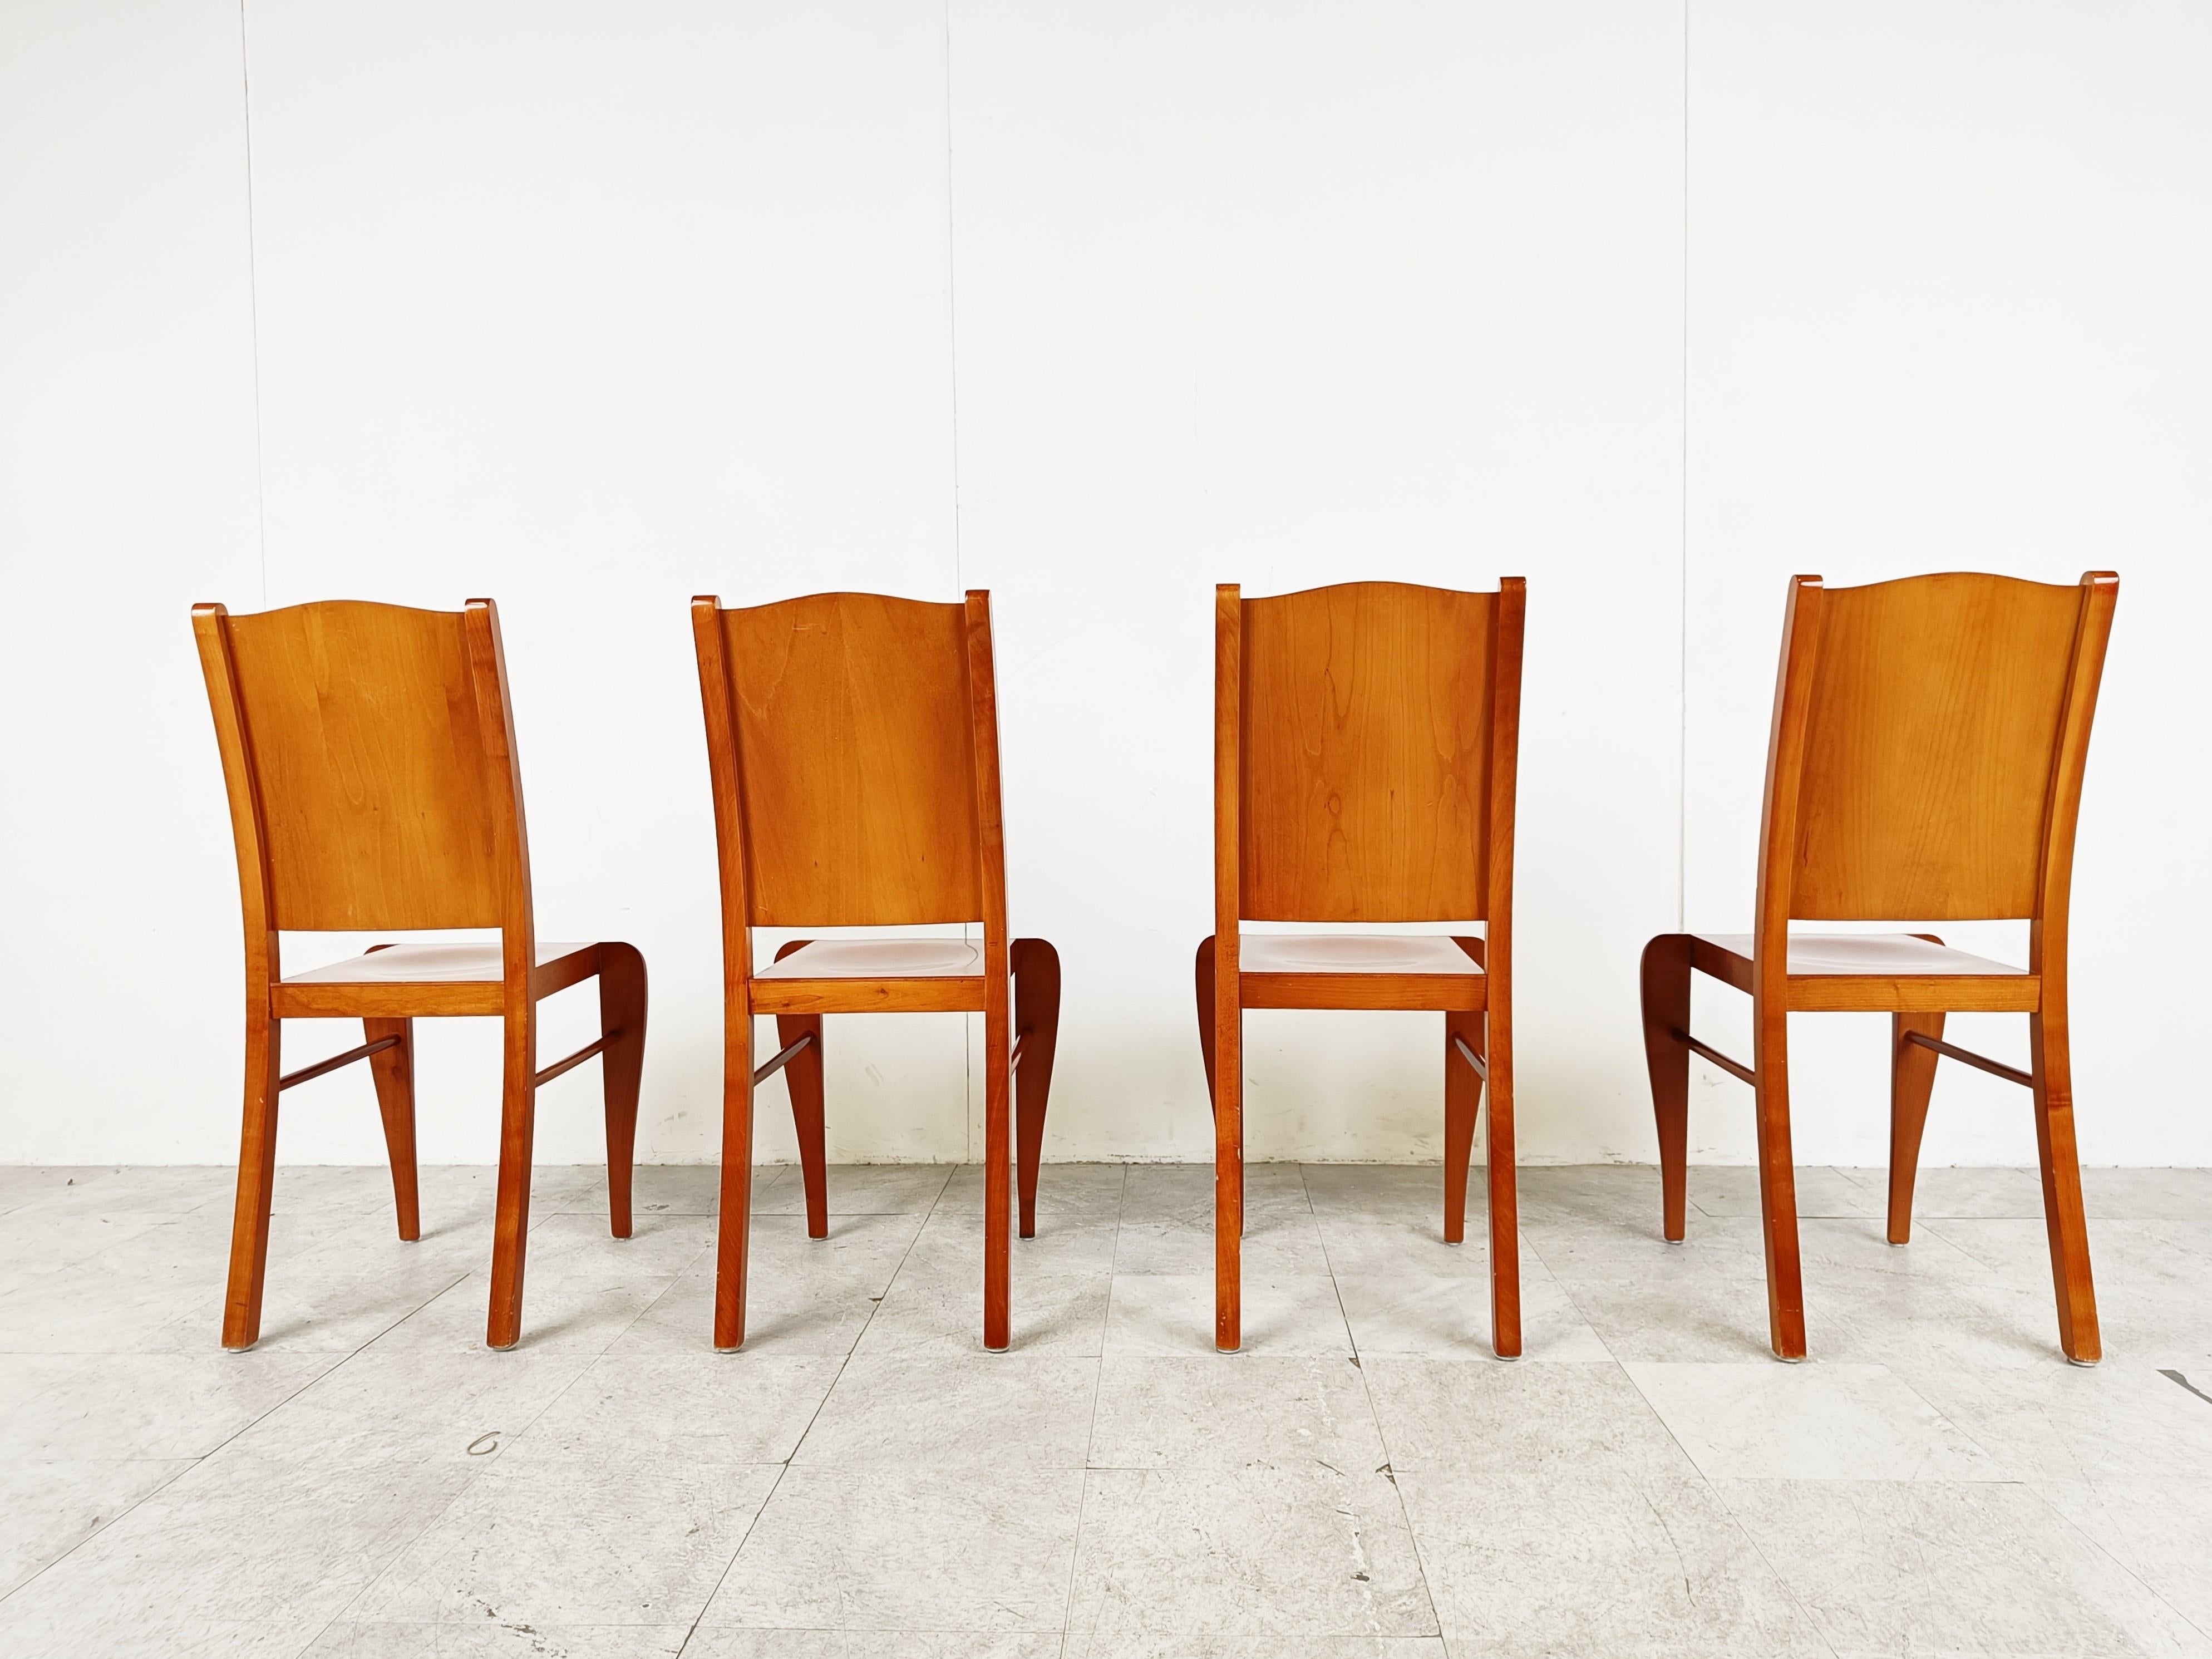 Cherry Set of 4 Placide of Wood Dining Chairs by Philippe Starck, 1989